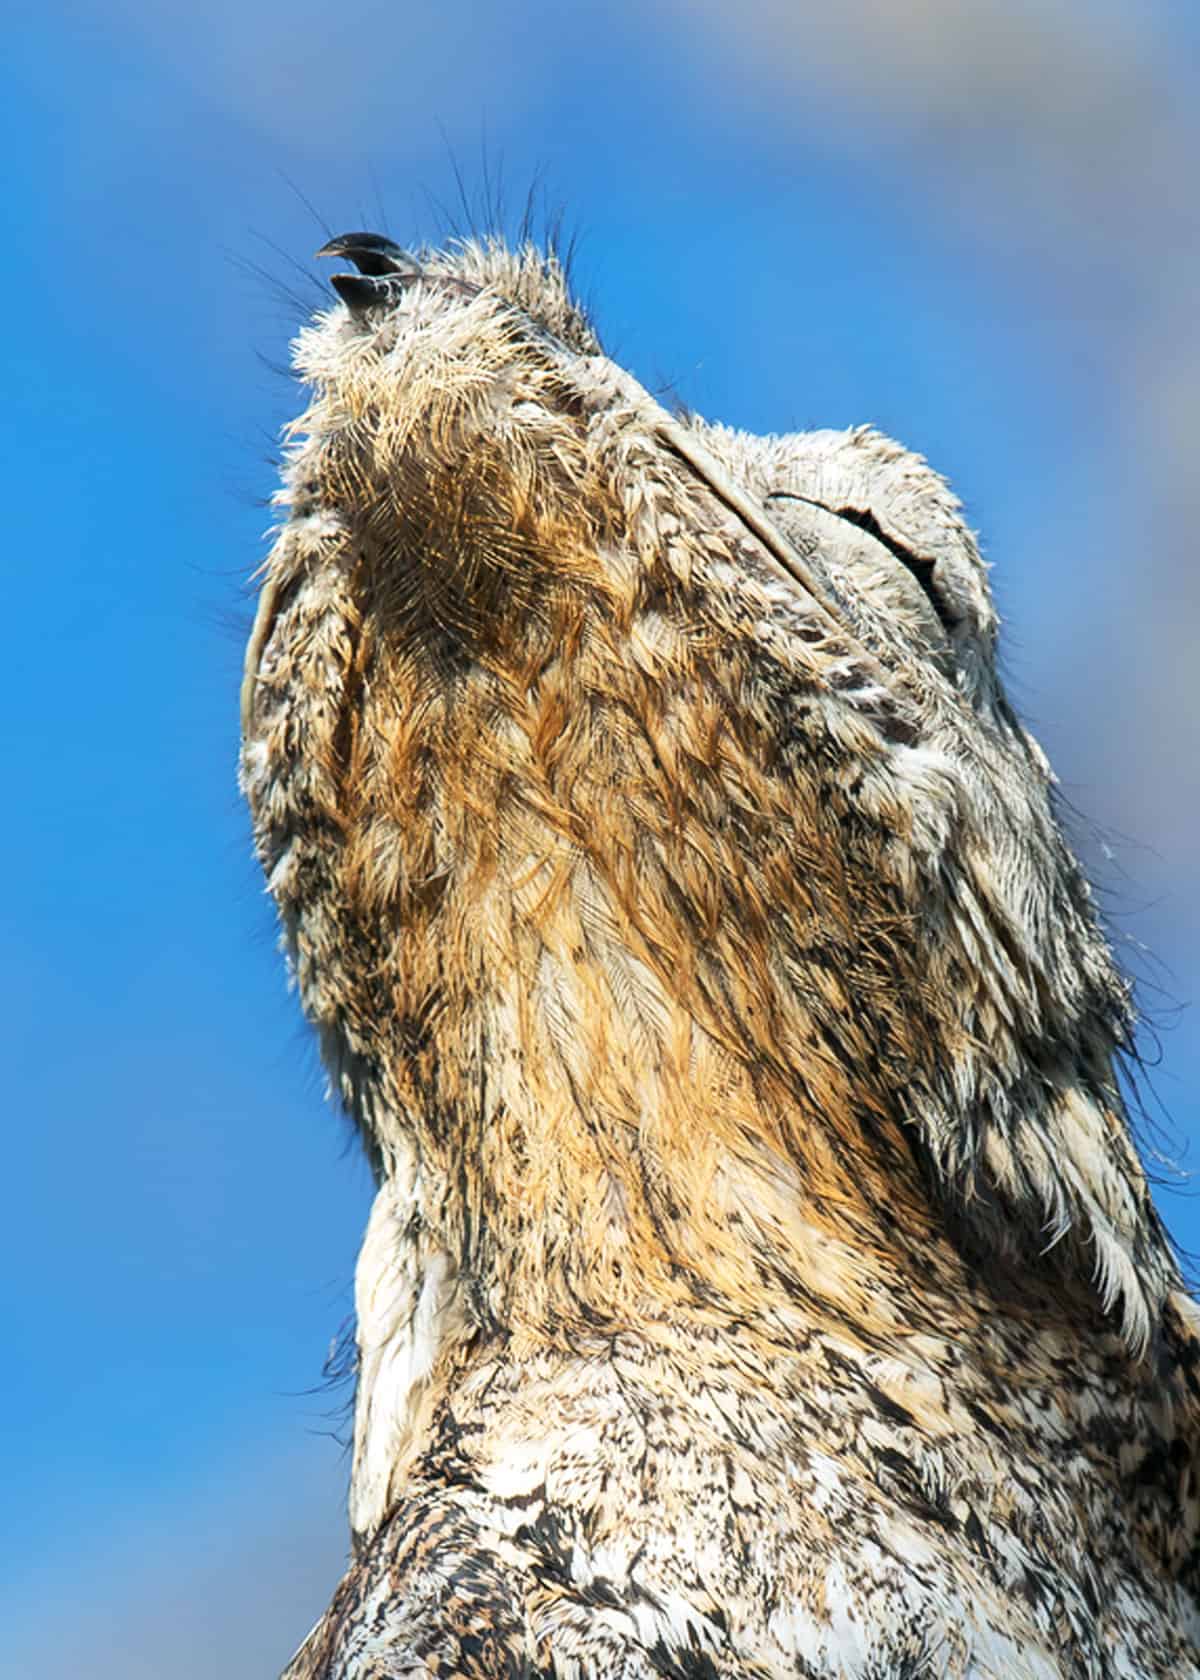 Potoo birds can see with their eyes closed!